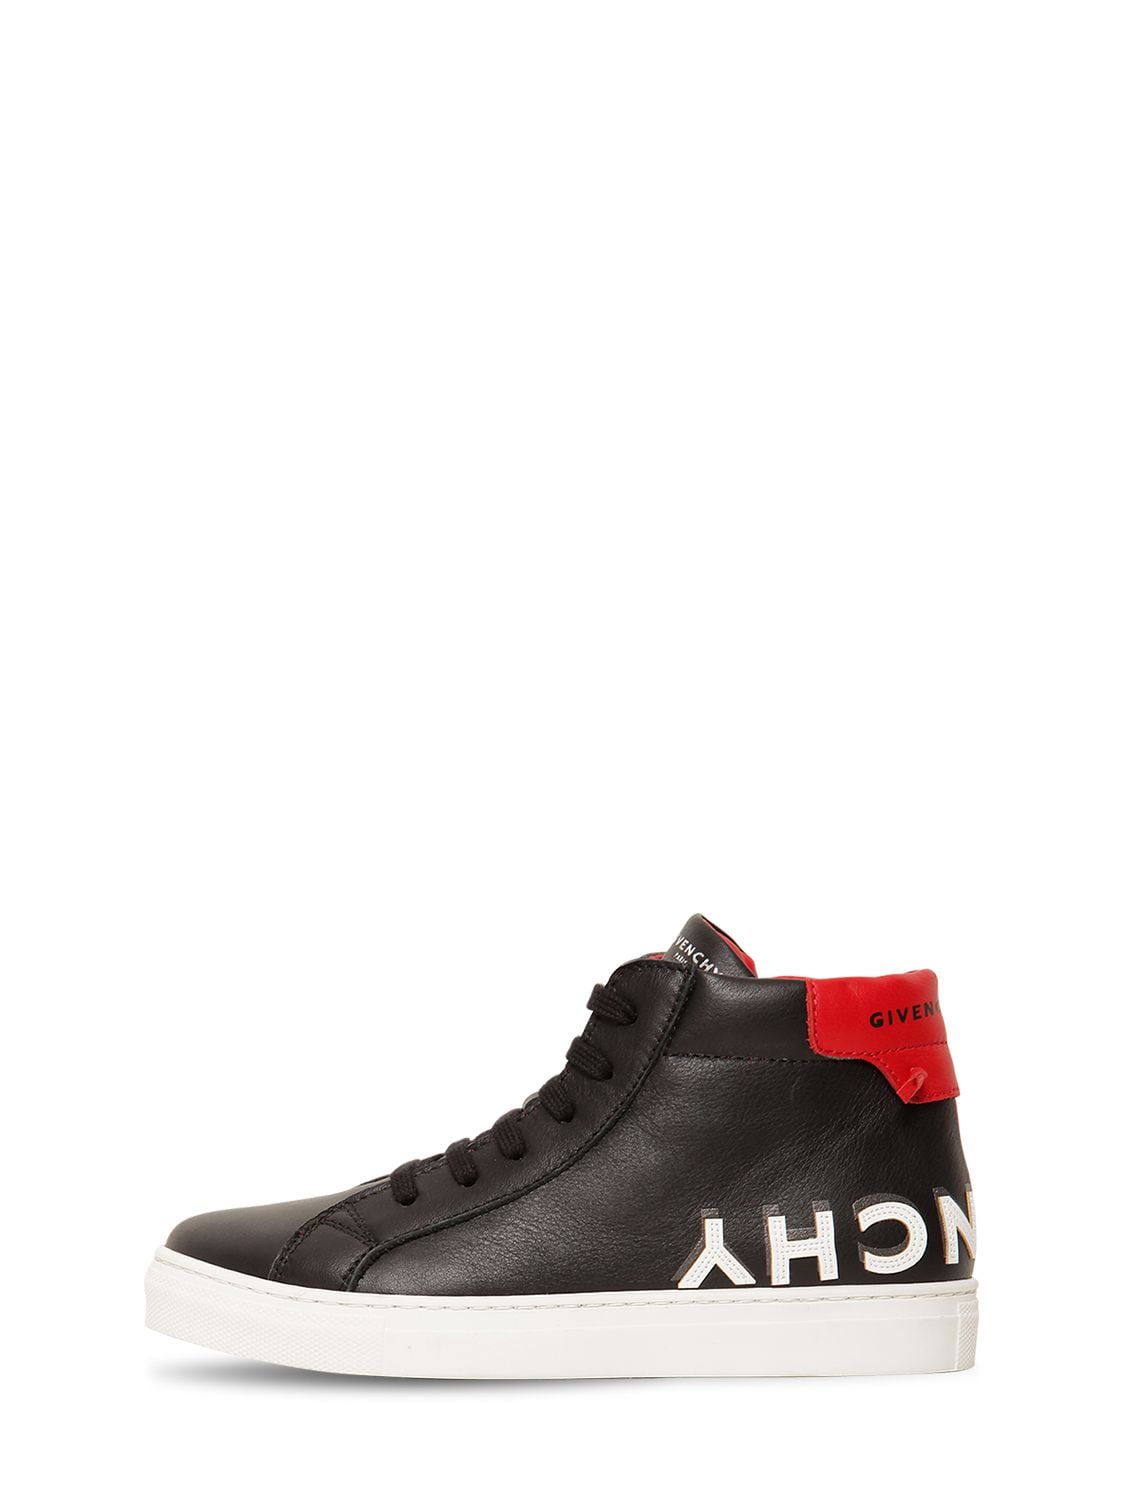 GIVENCHY LOGO PRINTED LEATHER HIGH TOP SNEAKERS,70IOFL091-MDLC0